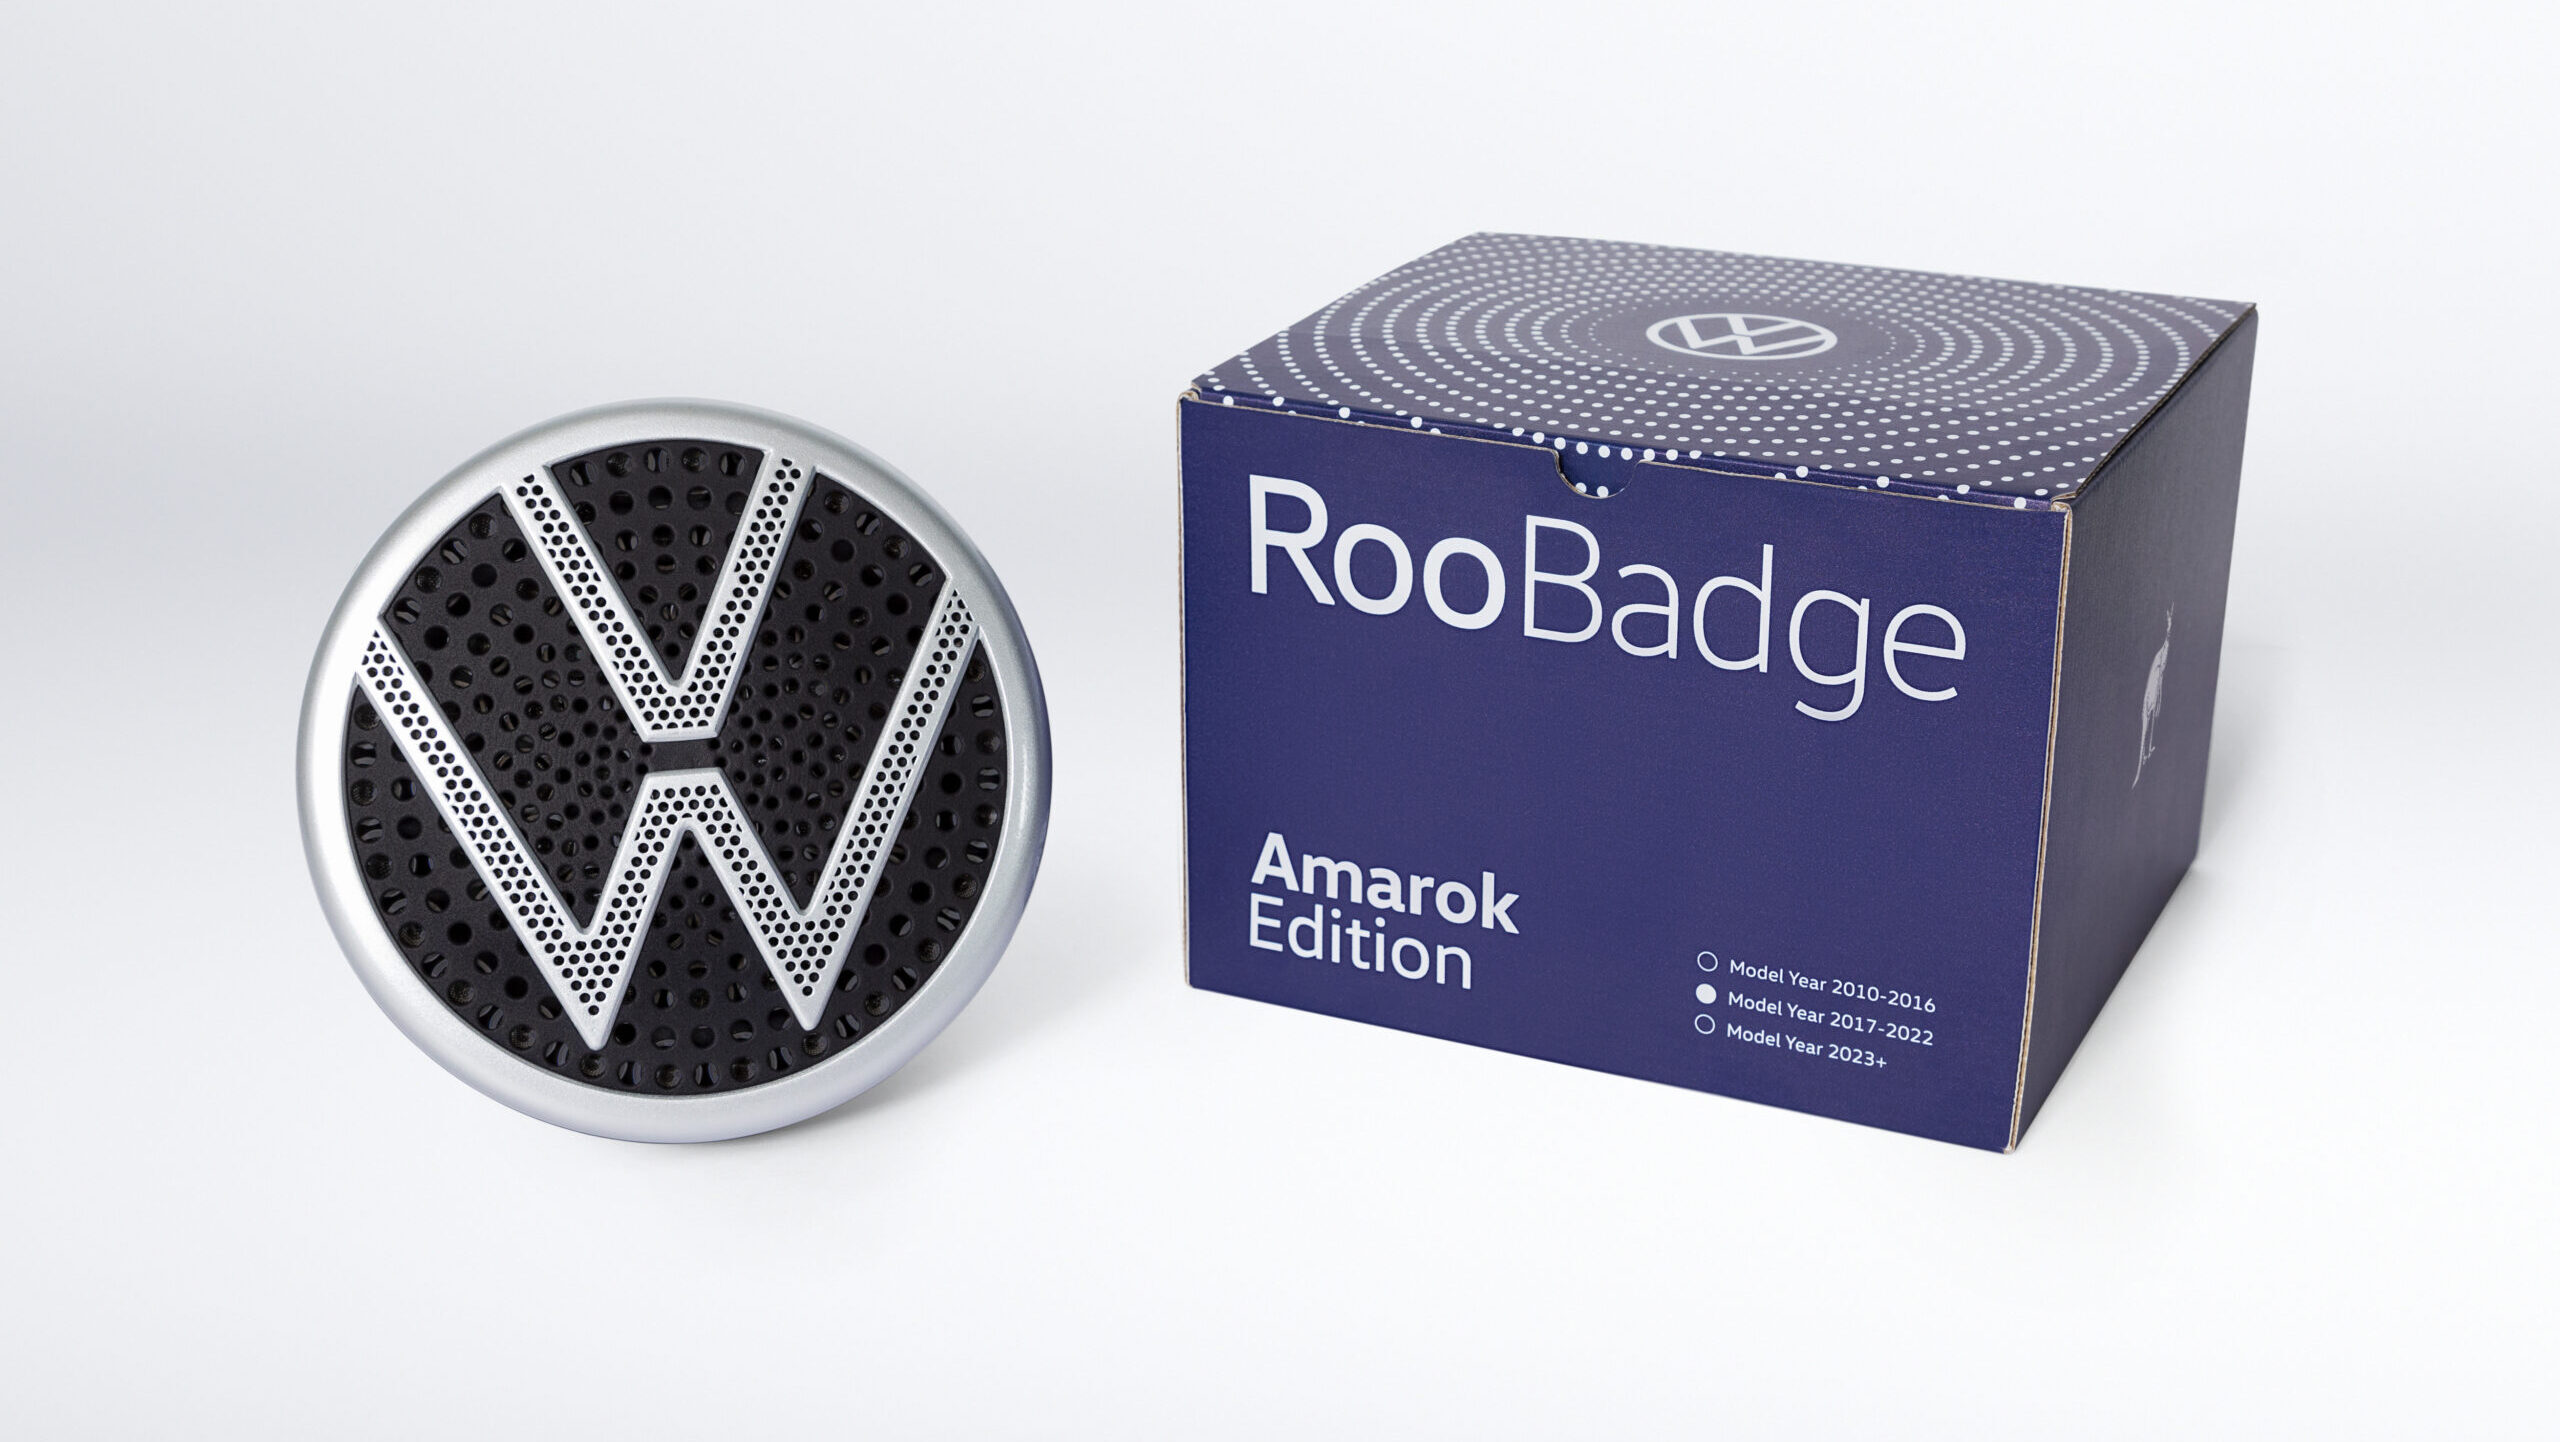 Volkswagen’s ‘RooBadge’ tool enters next trial phase